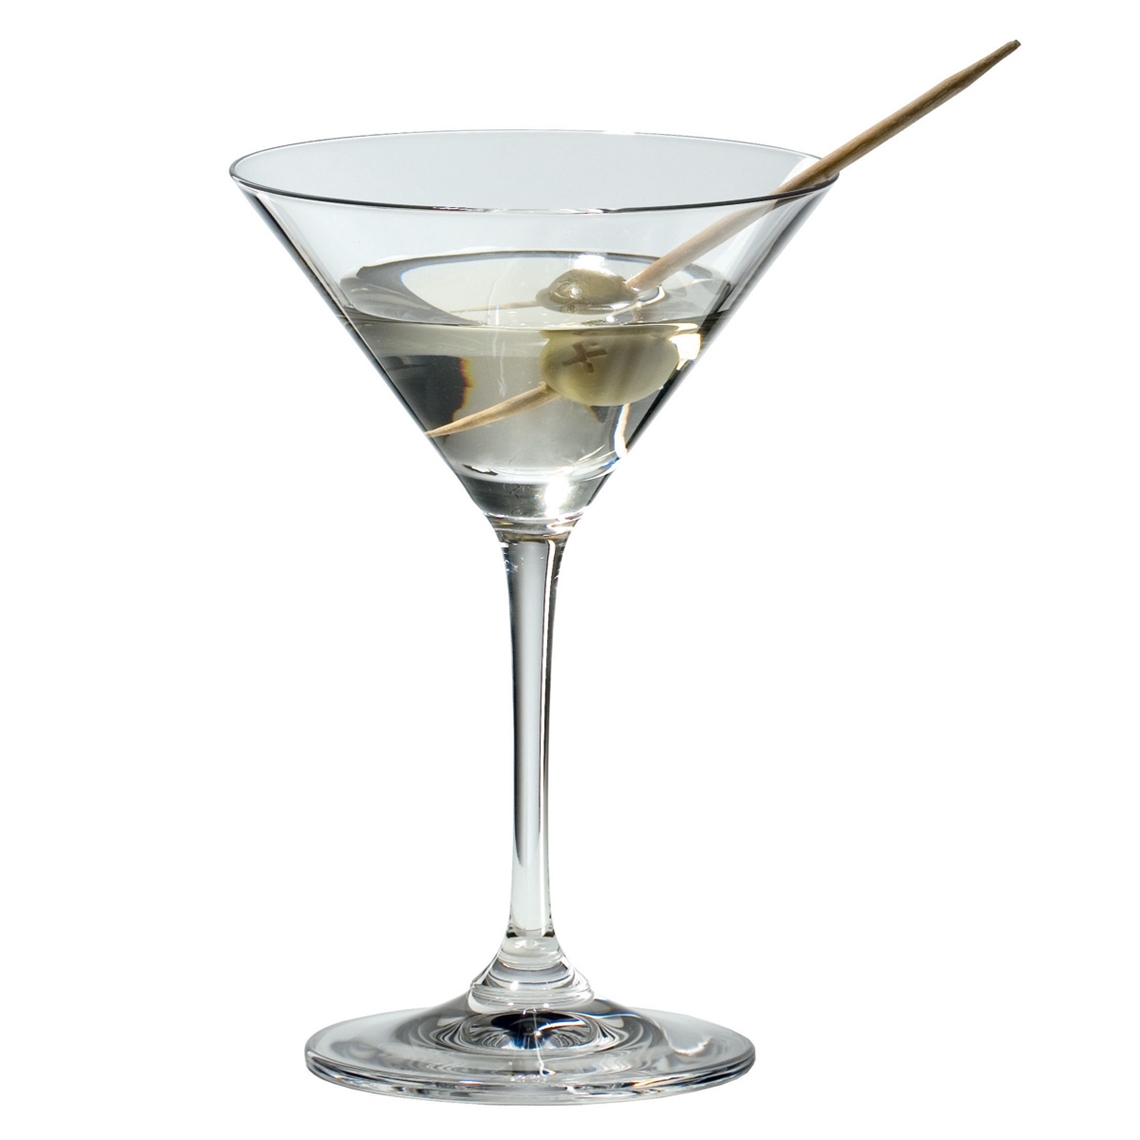 View more restaurant glasses - riedel from our Martini Glasses range